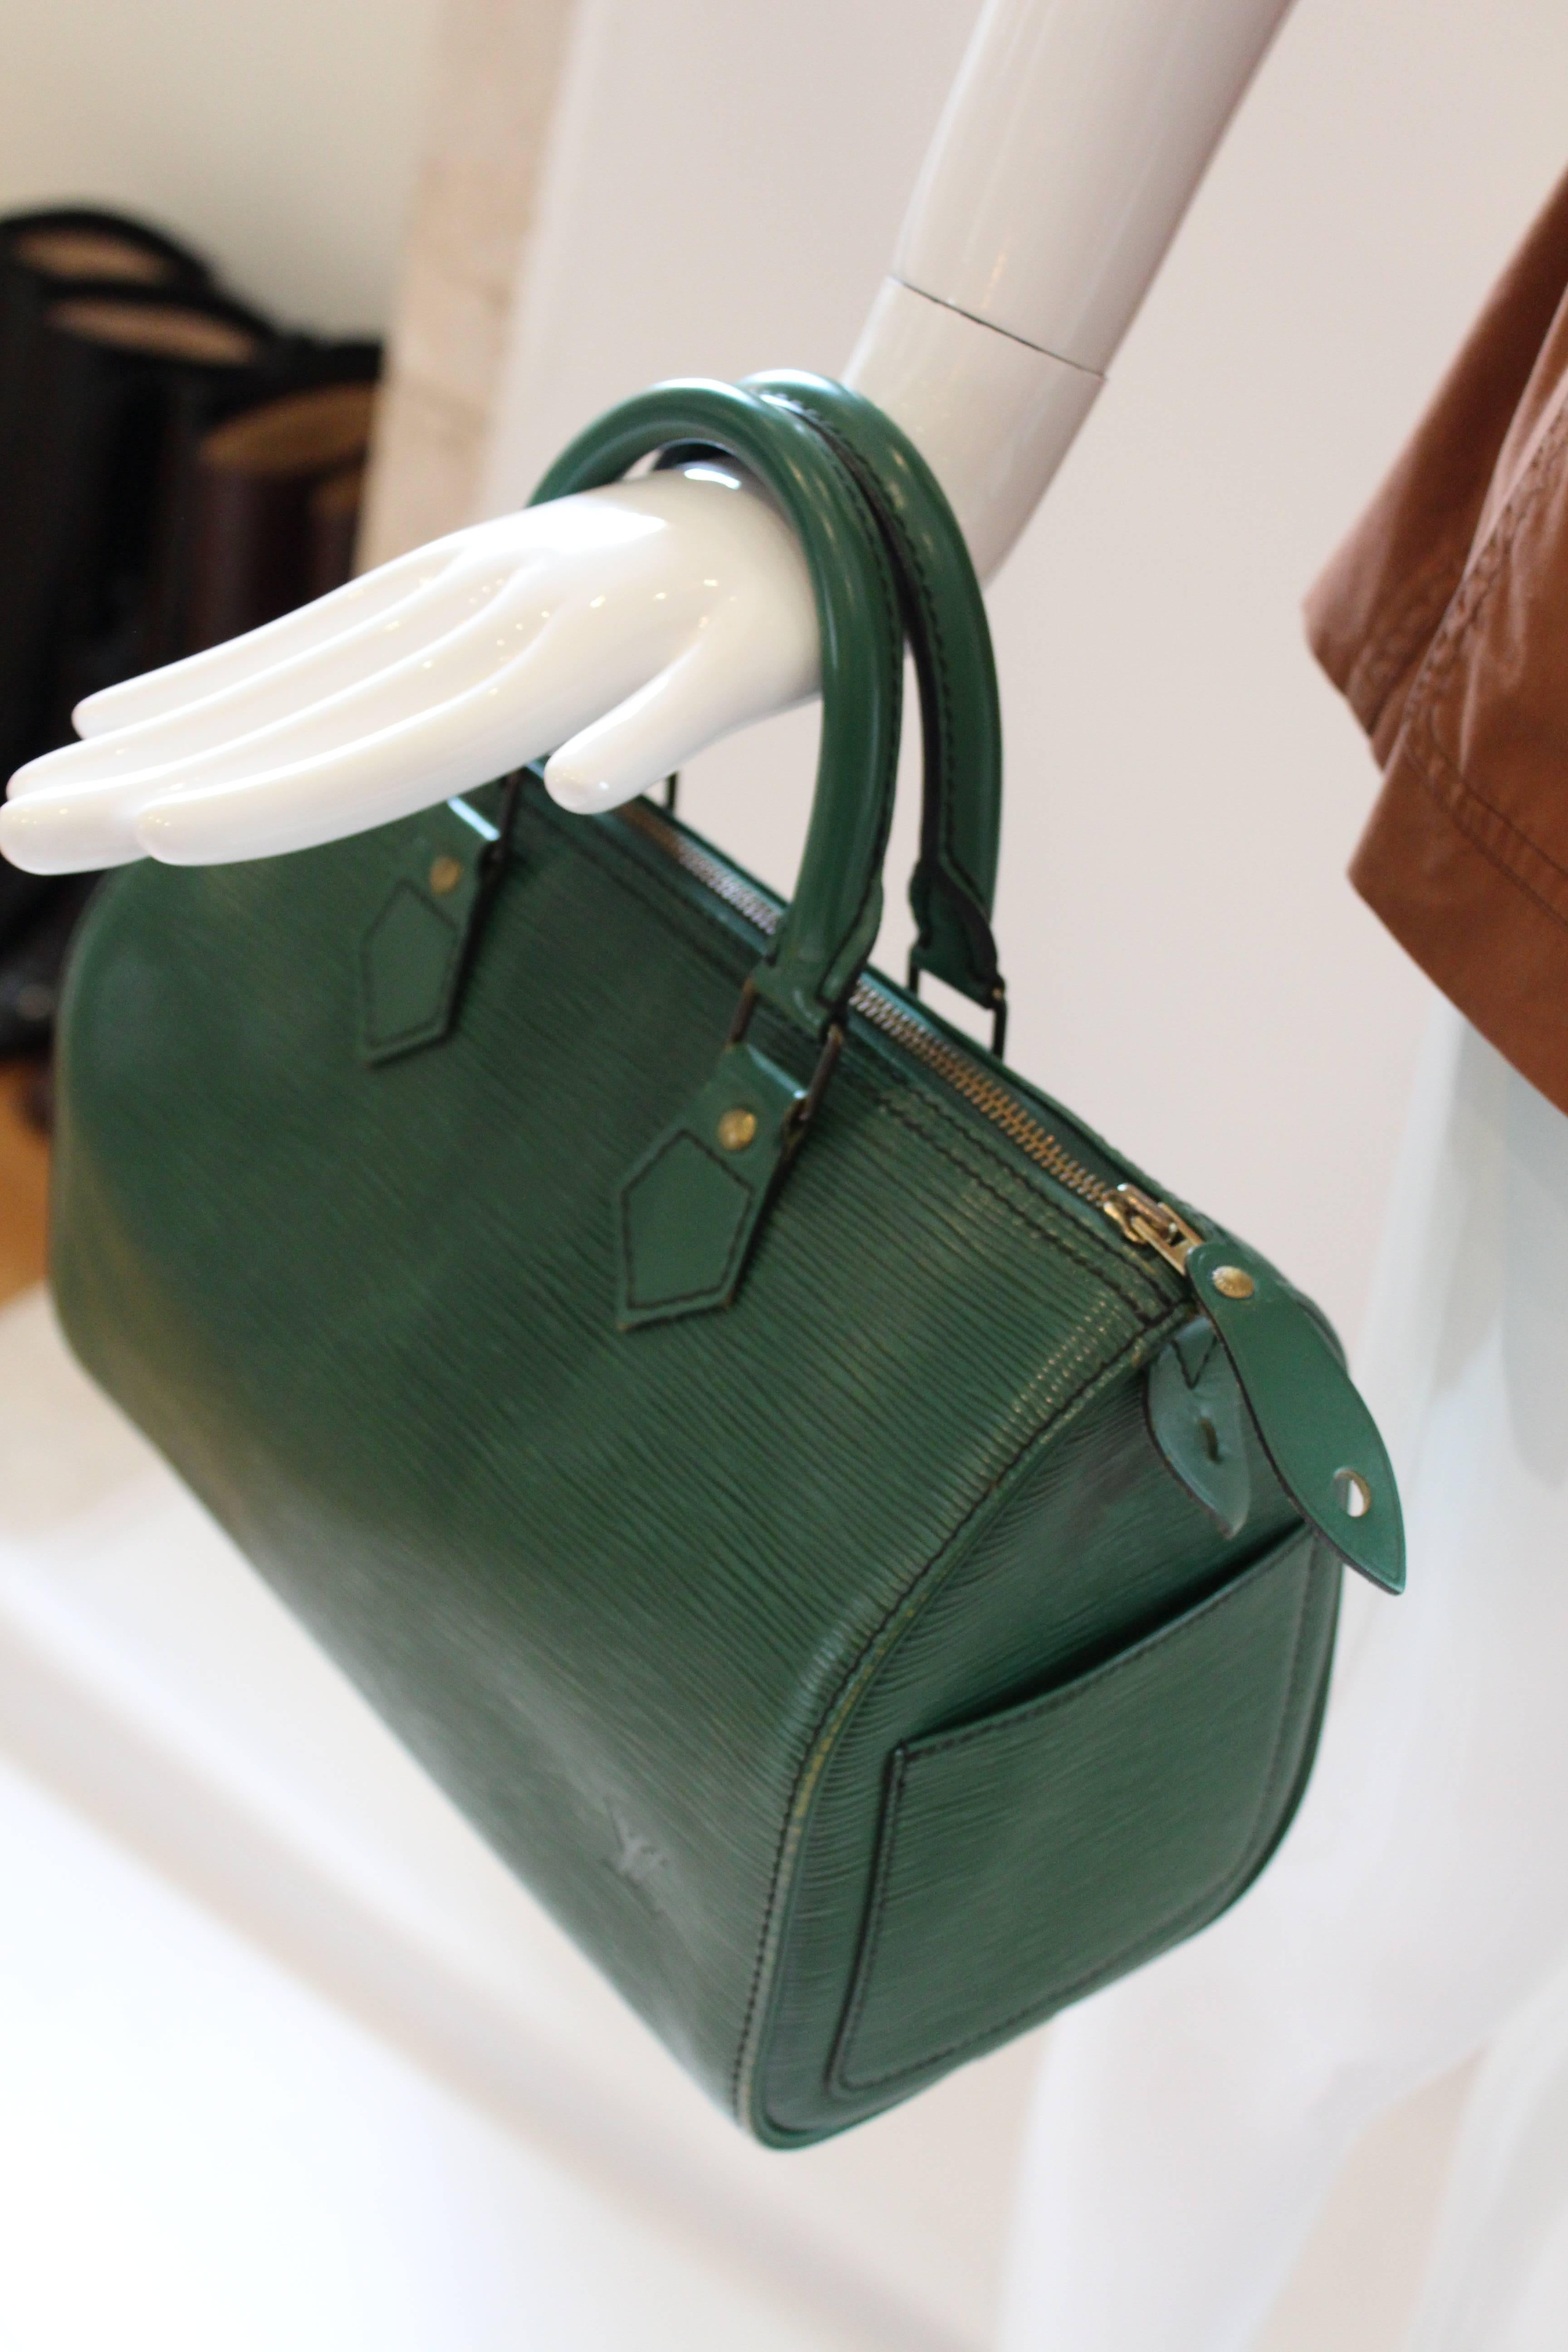 
This darling LV Epi Speedy is in perfect condition and large enough to hold all of your belongings.  It's Epi leather is a rich emerald color and bag features top handles and zip, inside and outside pockets.  The fine craftsmanship you have come